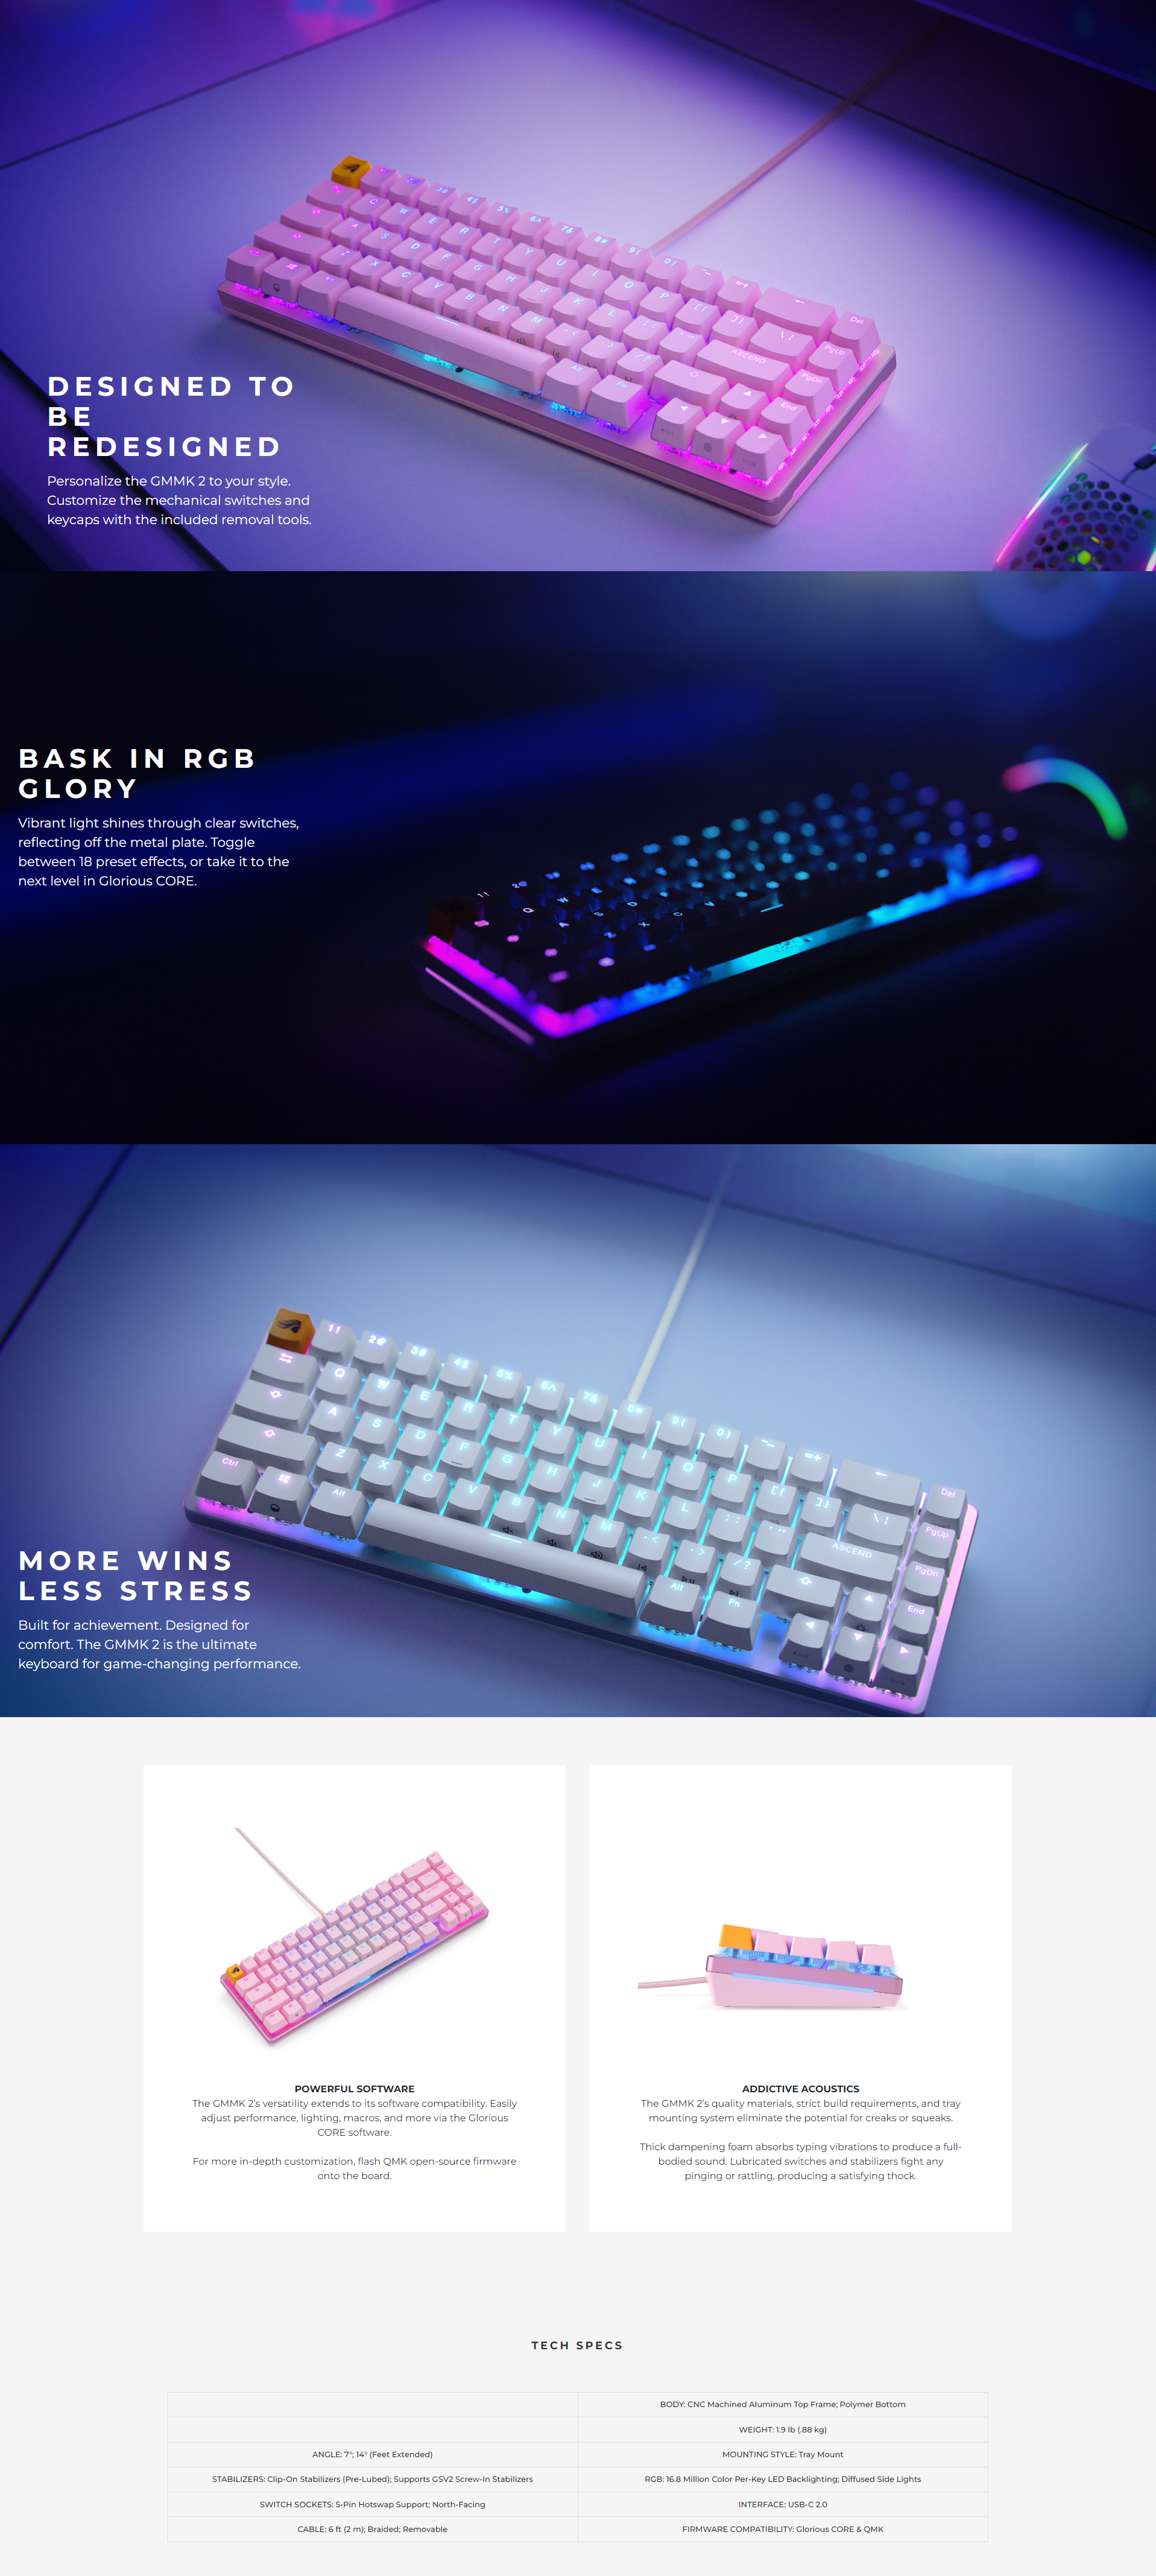 A large marketing image providing additional information about the product Glorious GMMK 2 Full Size Mechanical Keyboard - Black (Barebones) - Additional alt info not provided